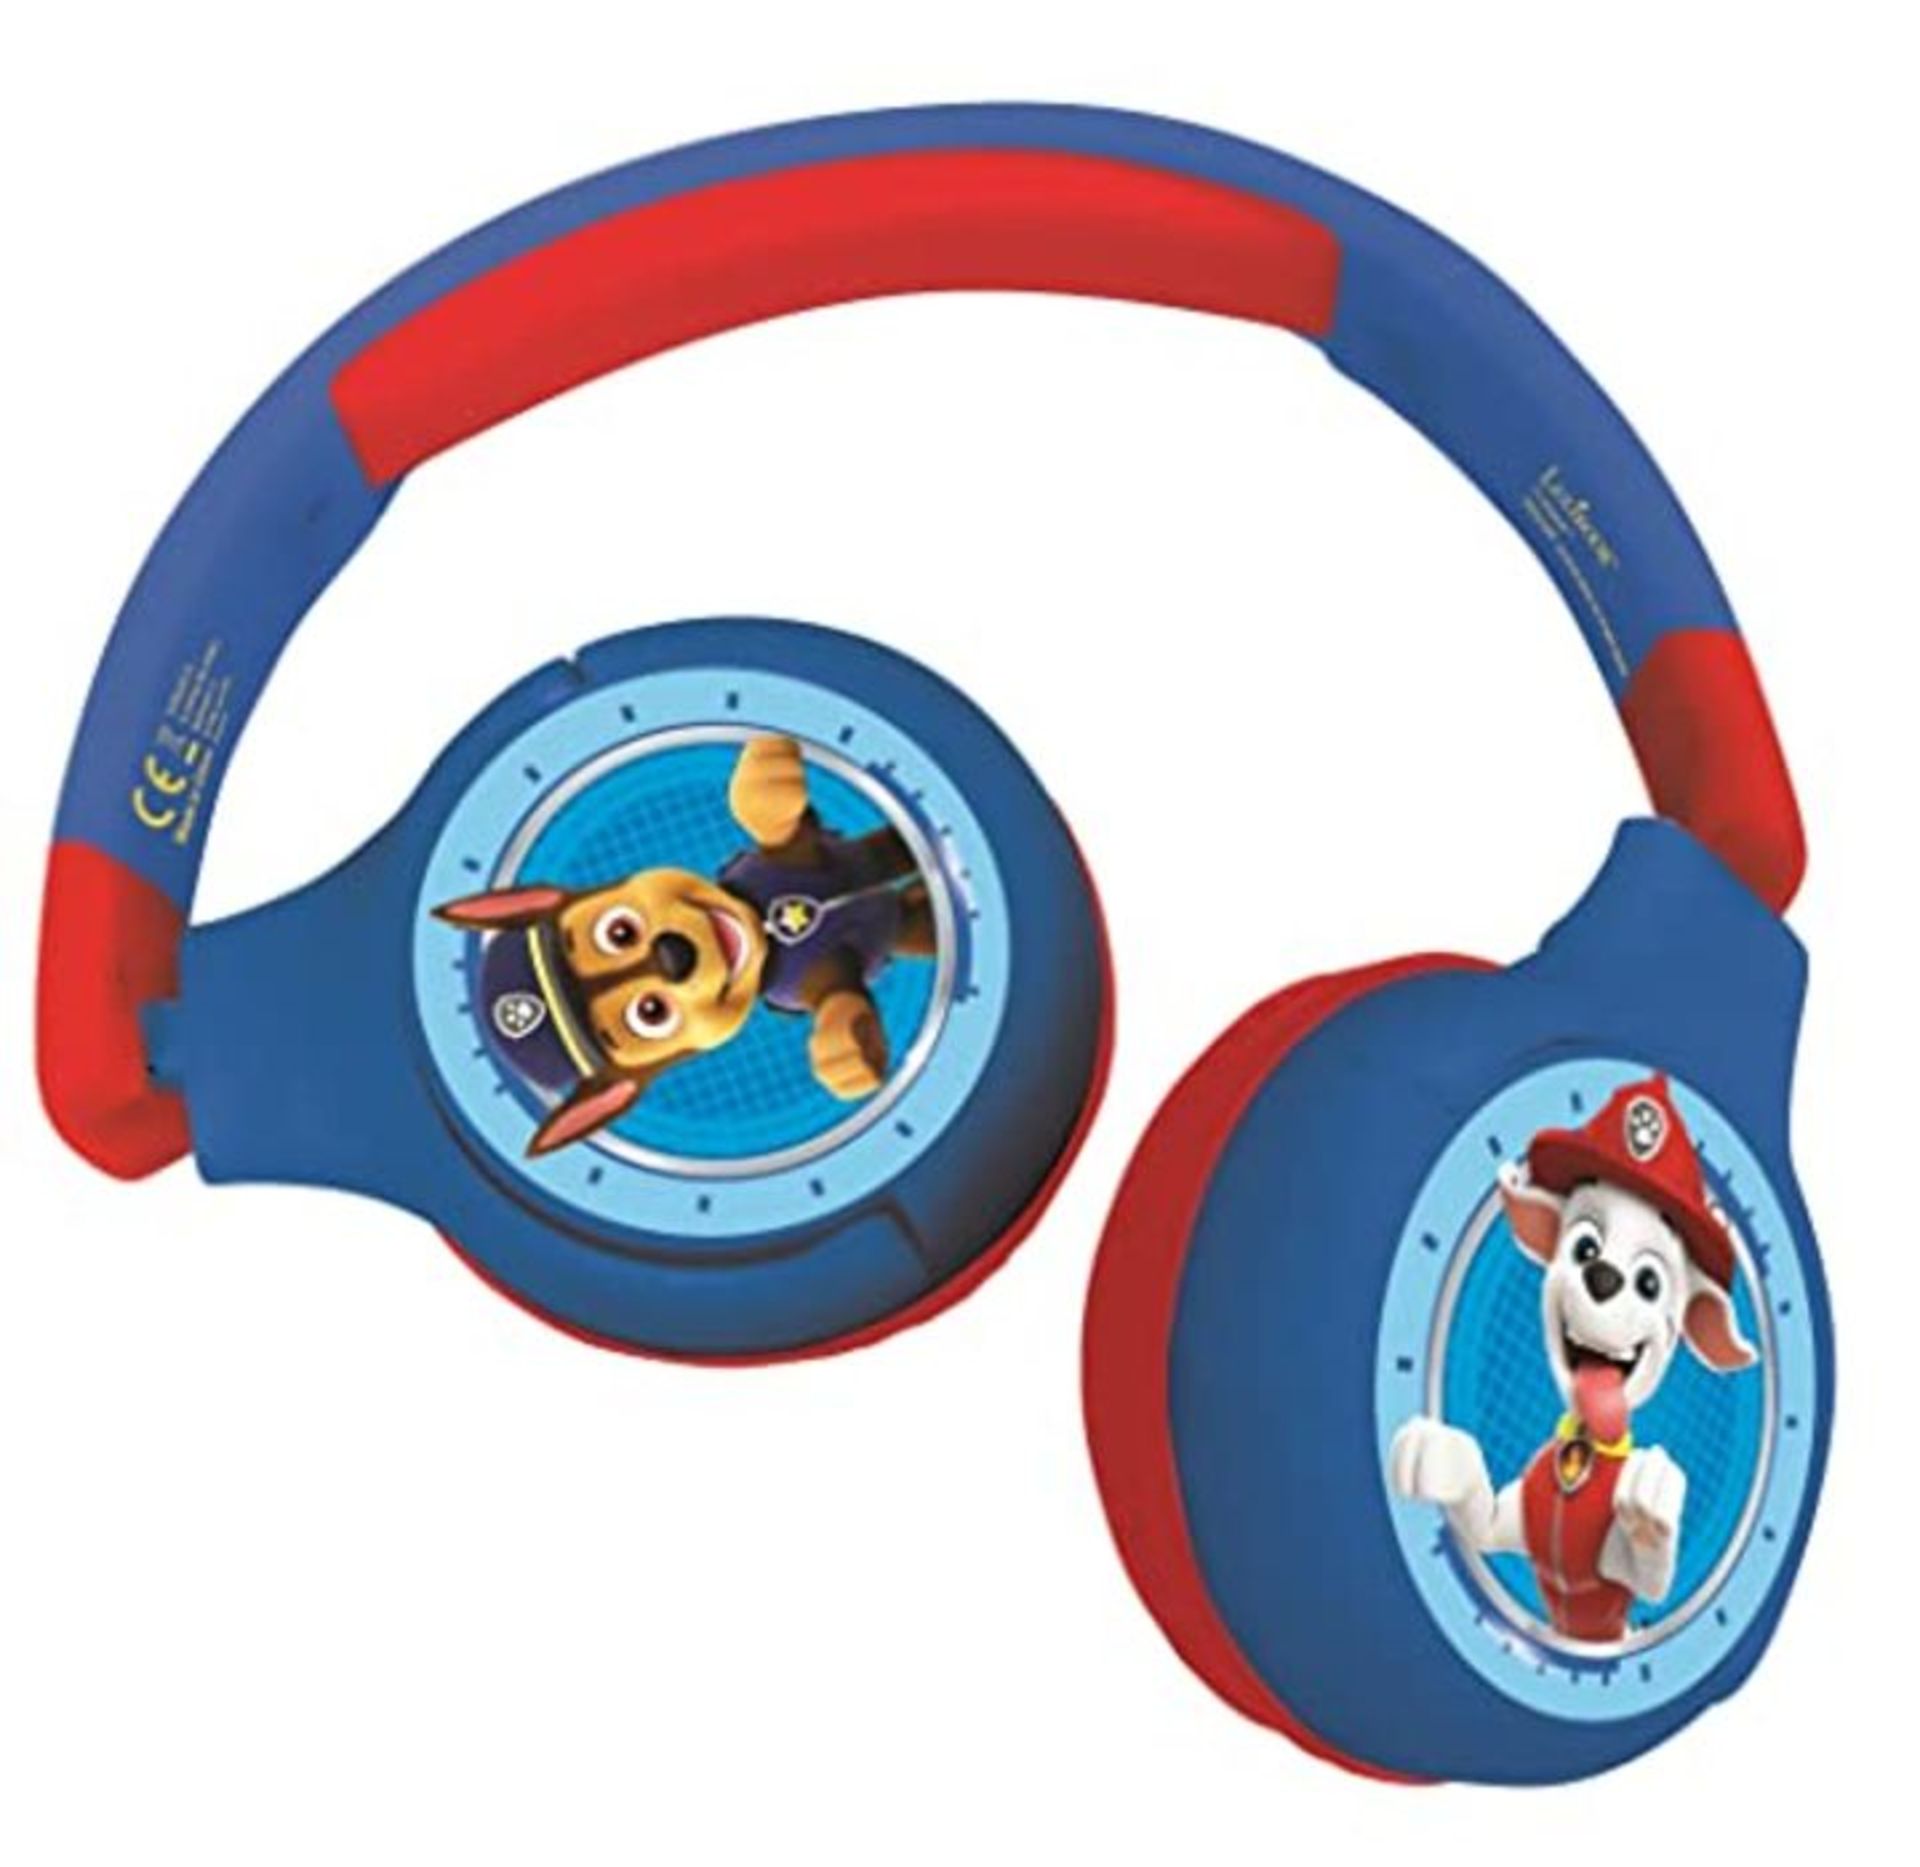 [CRACKED] LEXIBOOK HPBT010PA Paw Patrol 2-in-1 Bluetooth Headphones Stereo Wireless Wi